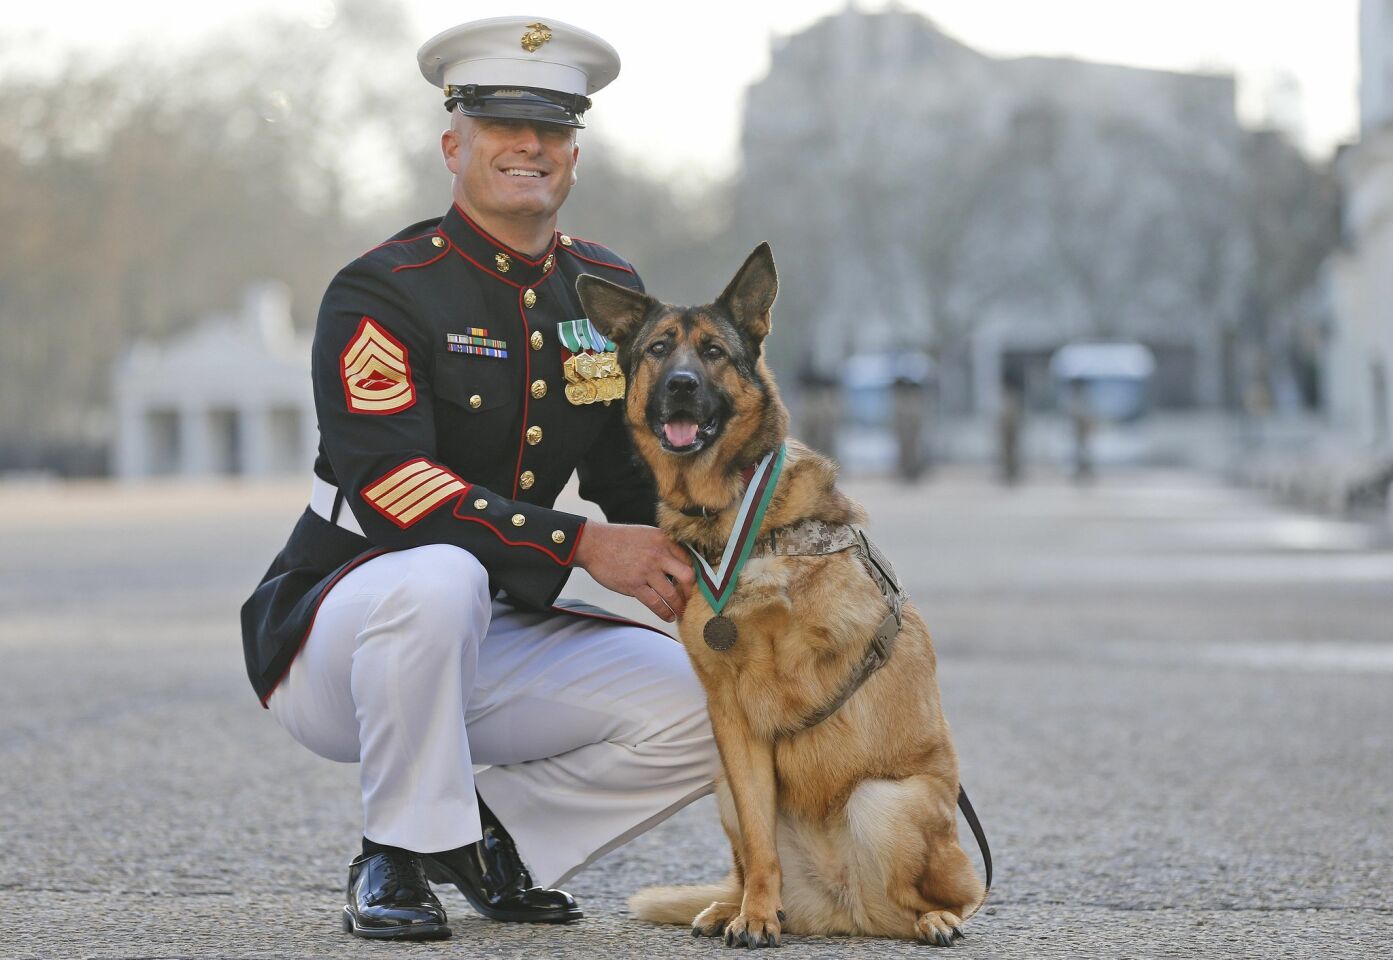 Gunnery sergeant Christopher Willingham, of Tuscaloosa, Alabama, USA, poses with retired US Marine dog Lucca, after receiving the PDSA Dickin Medal, awarded for animal bravery.